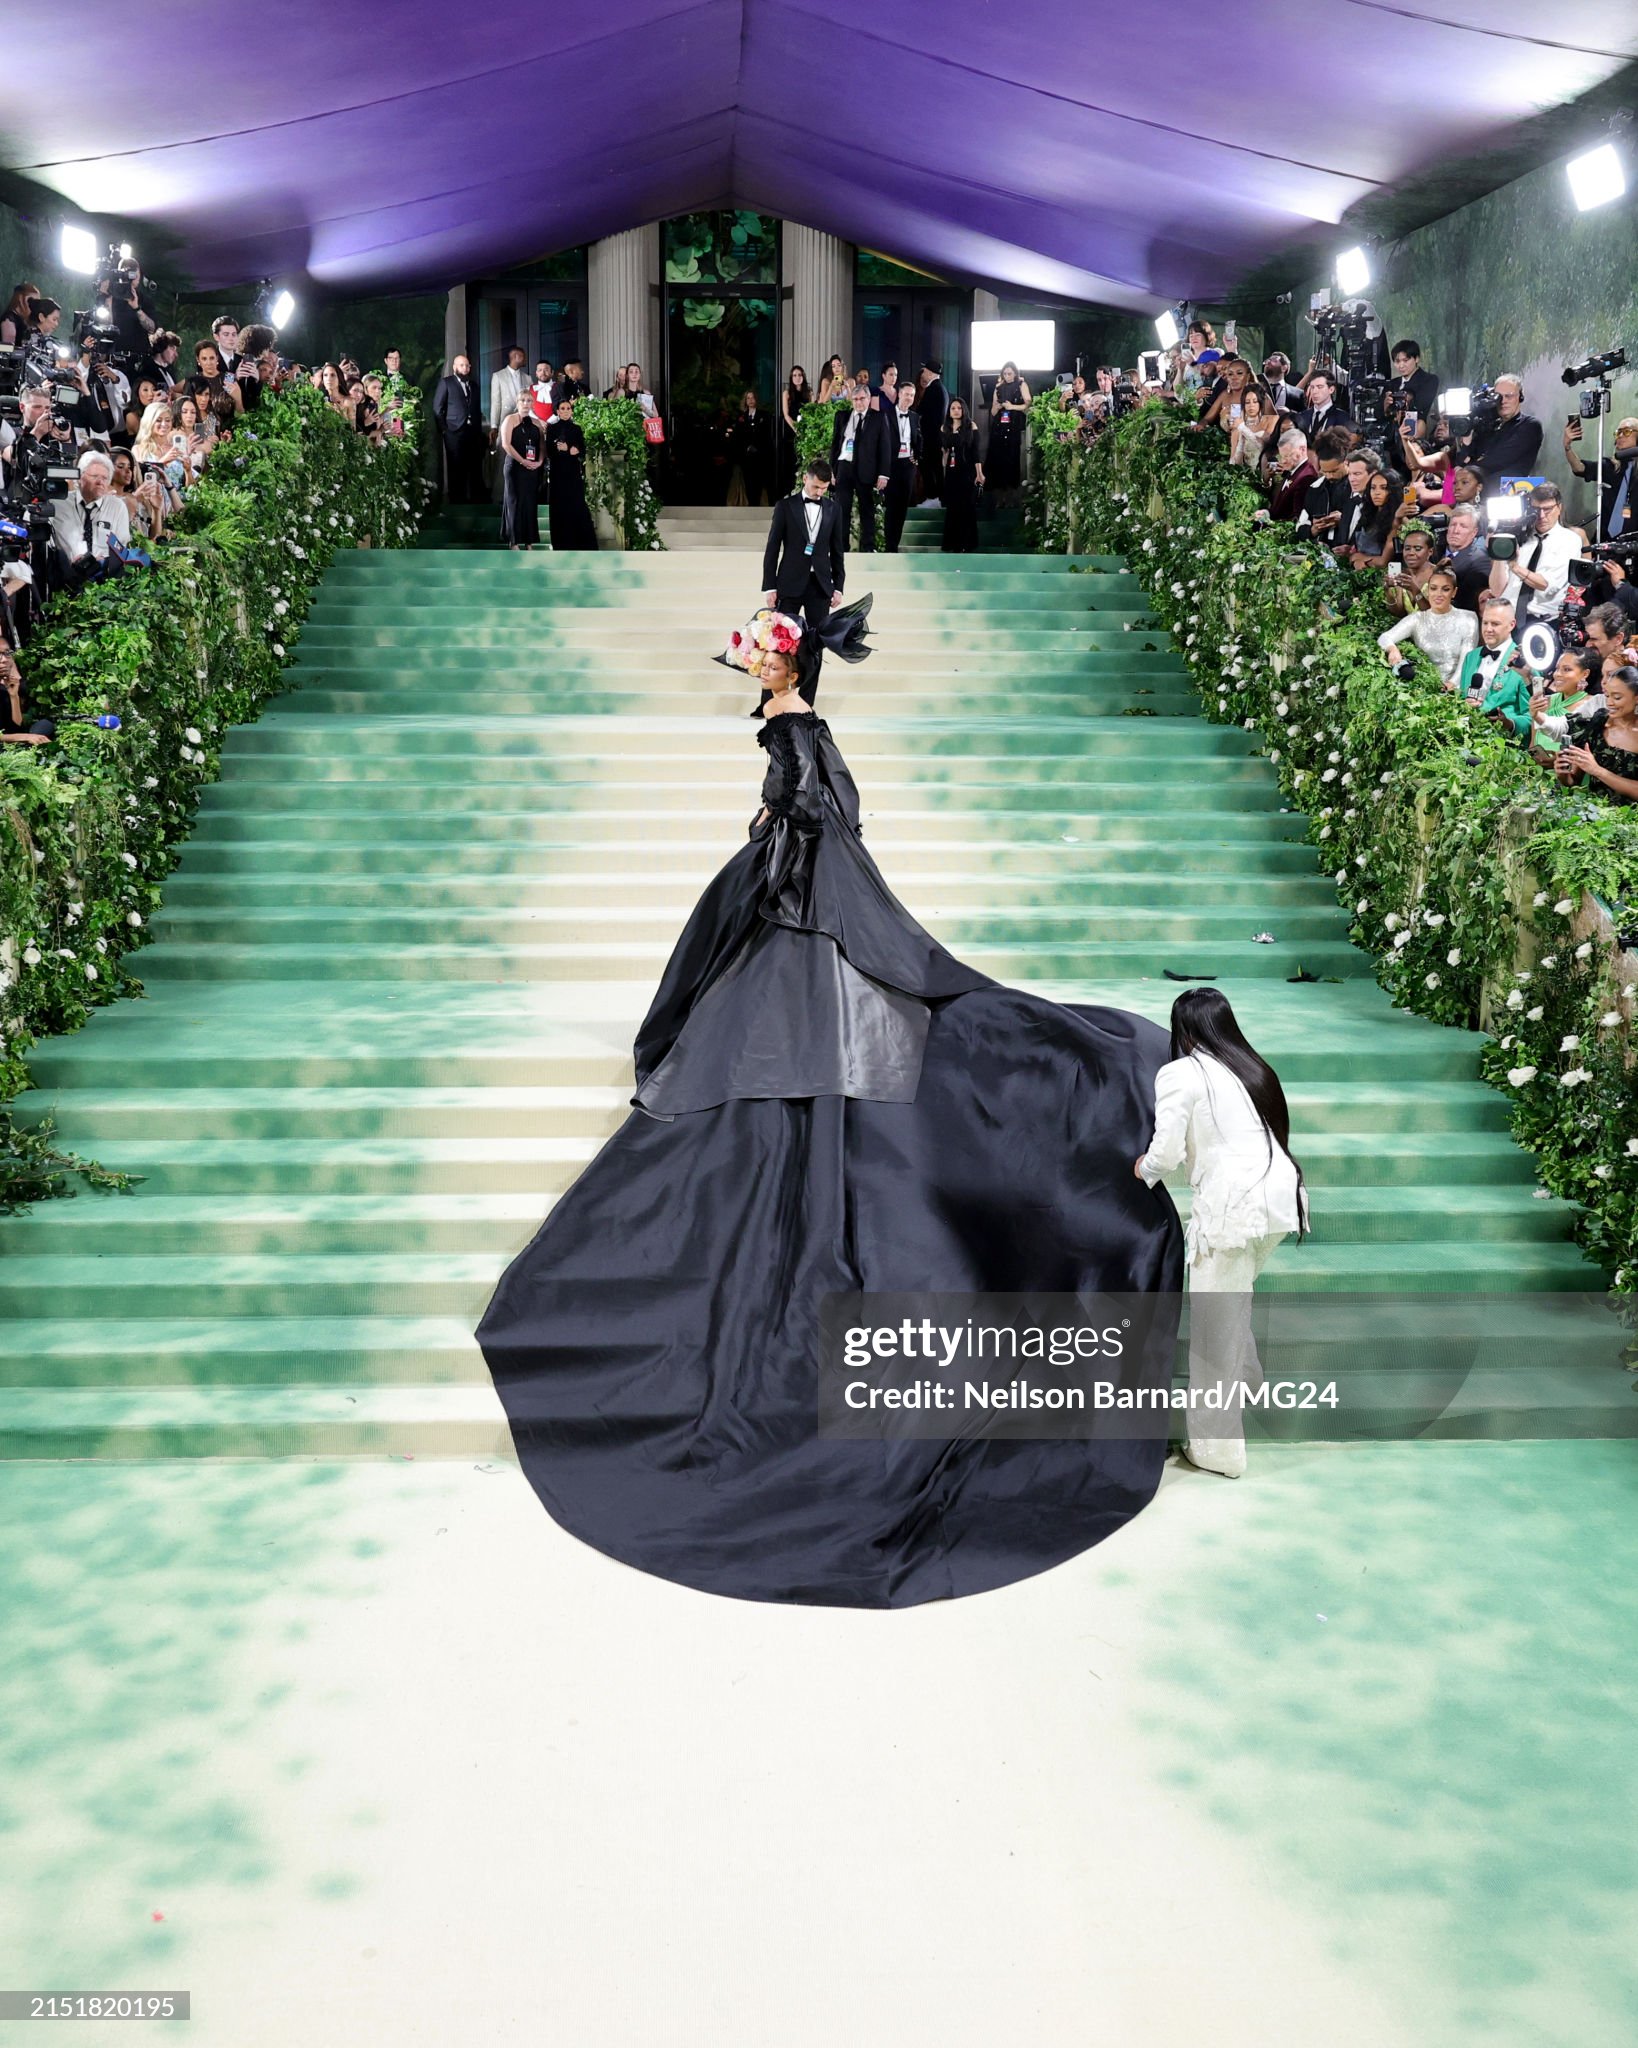 gettyimages-2151820195-2048x2048.jpg